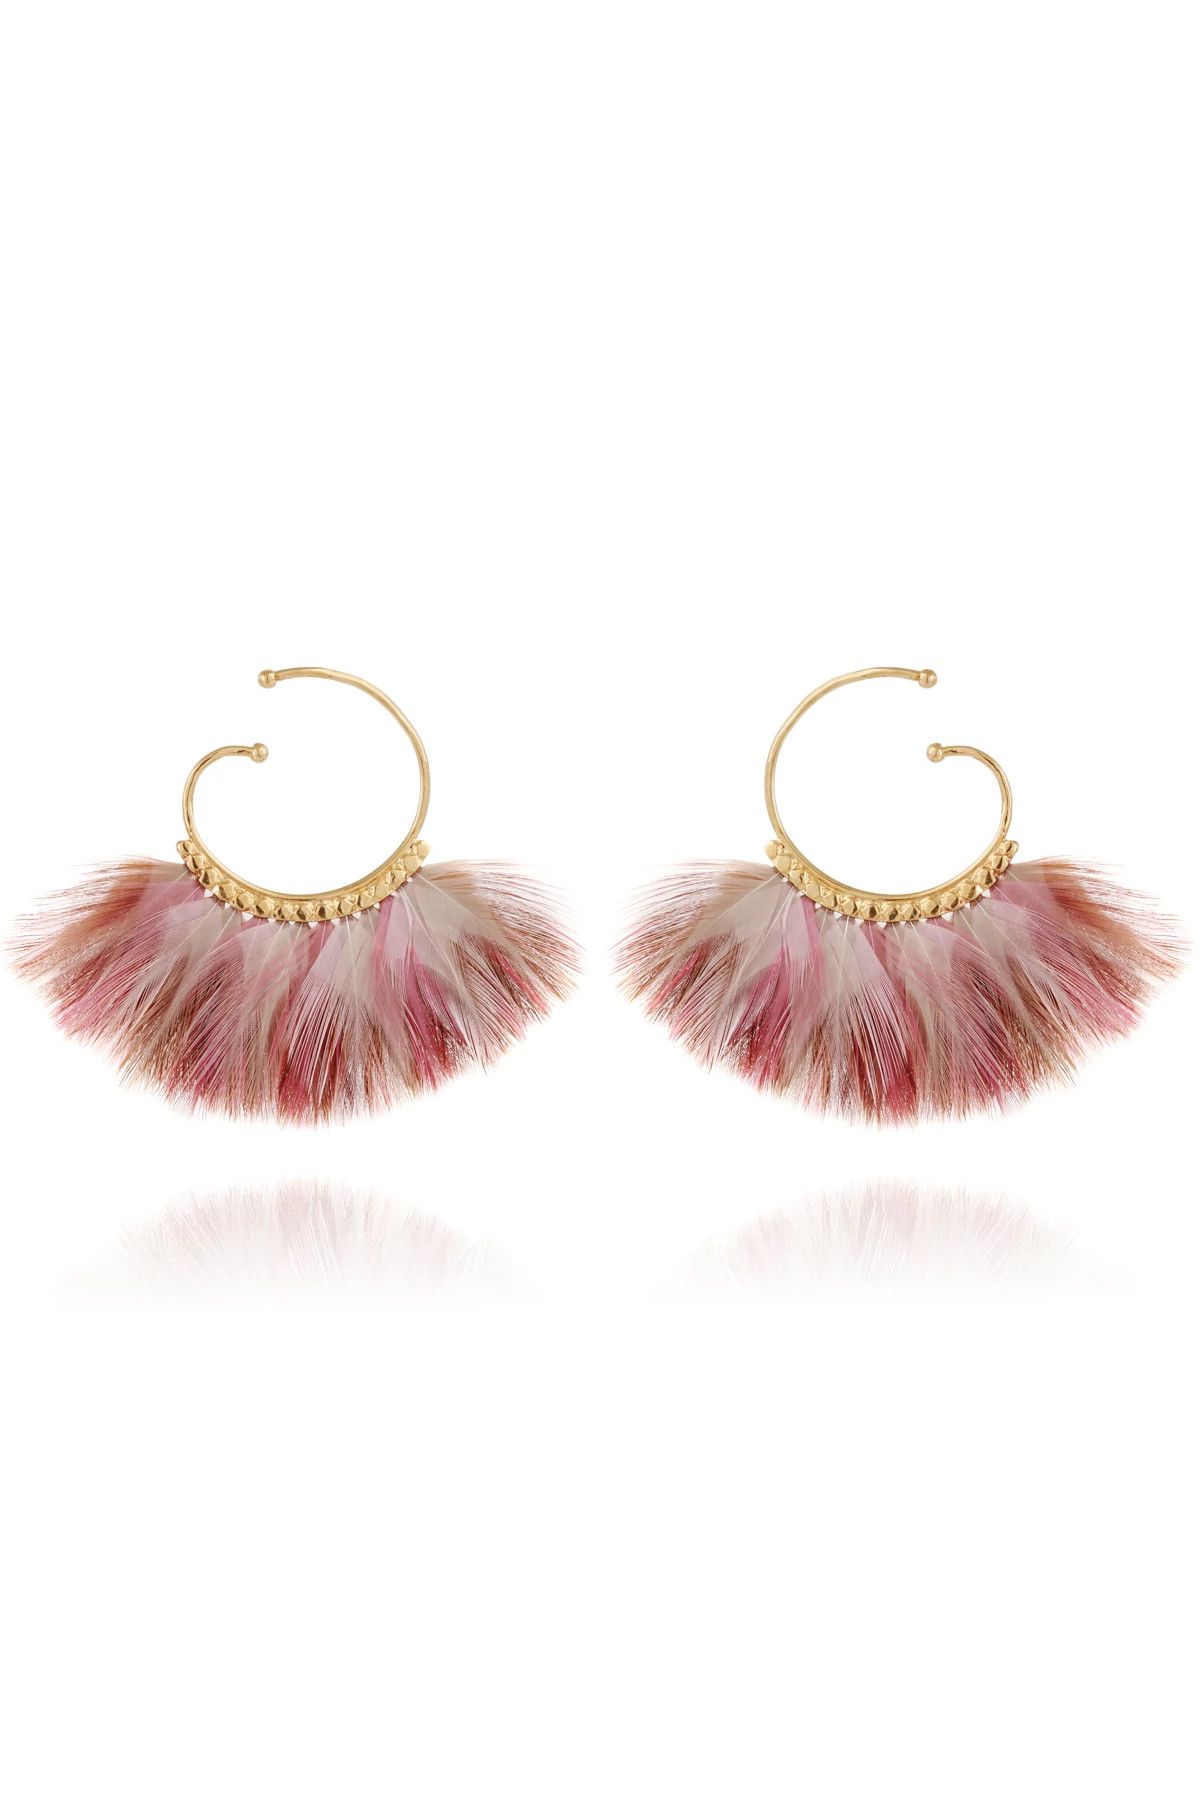 Buzios Feather Earrings | Everything But Water